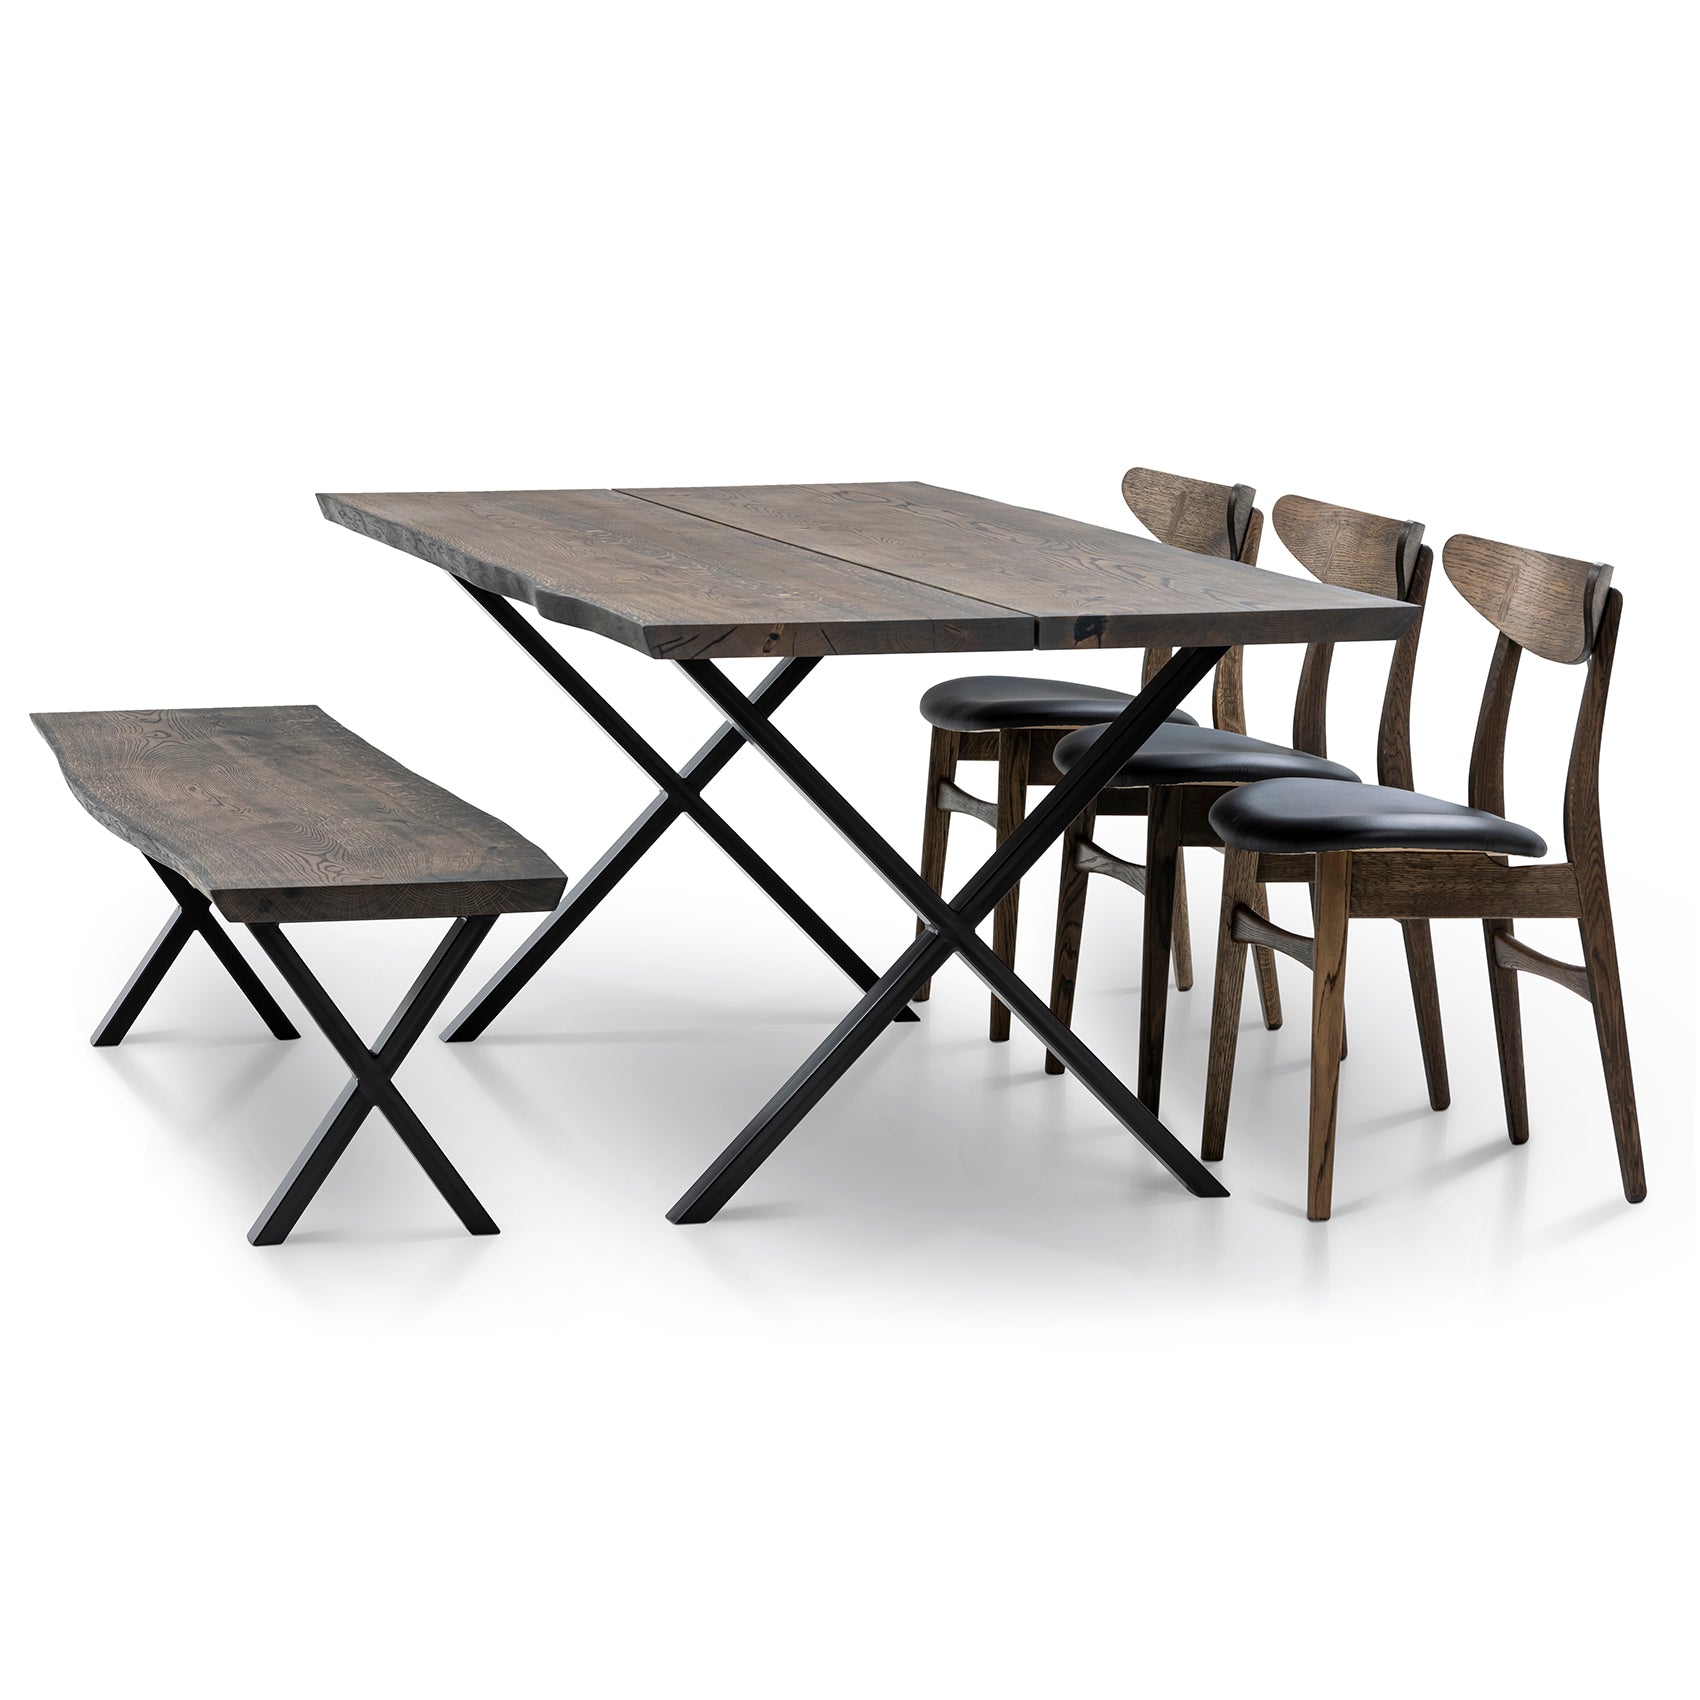 Charcoal Oak Dining Table Extendable - S10Home